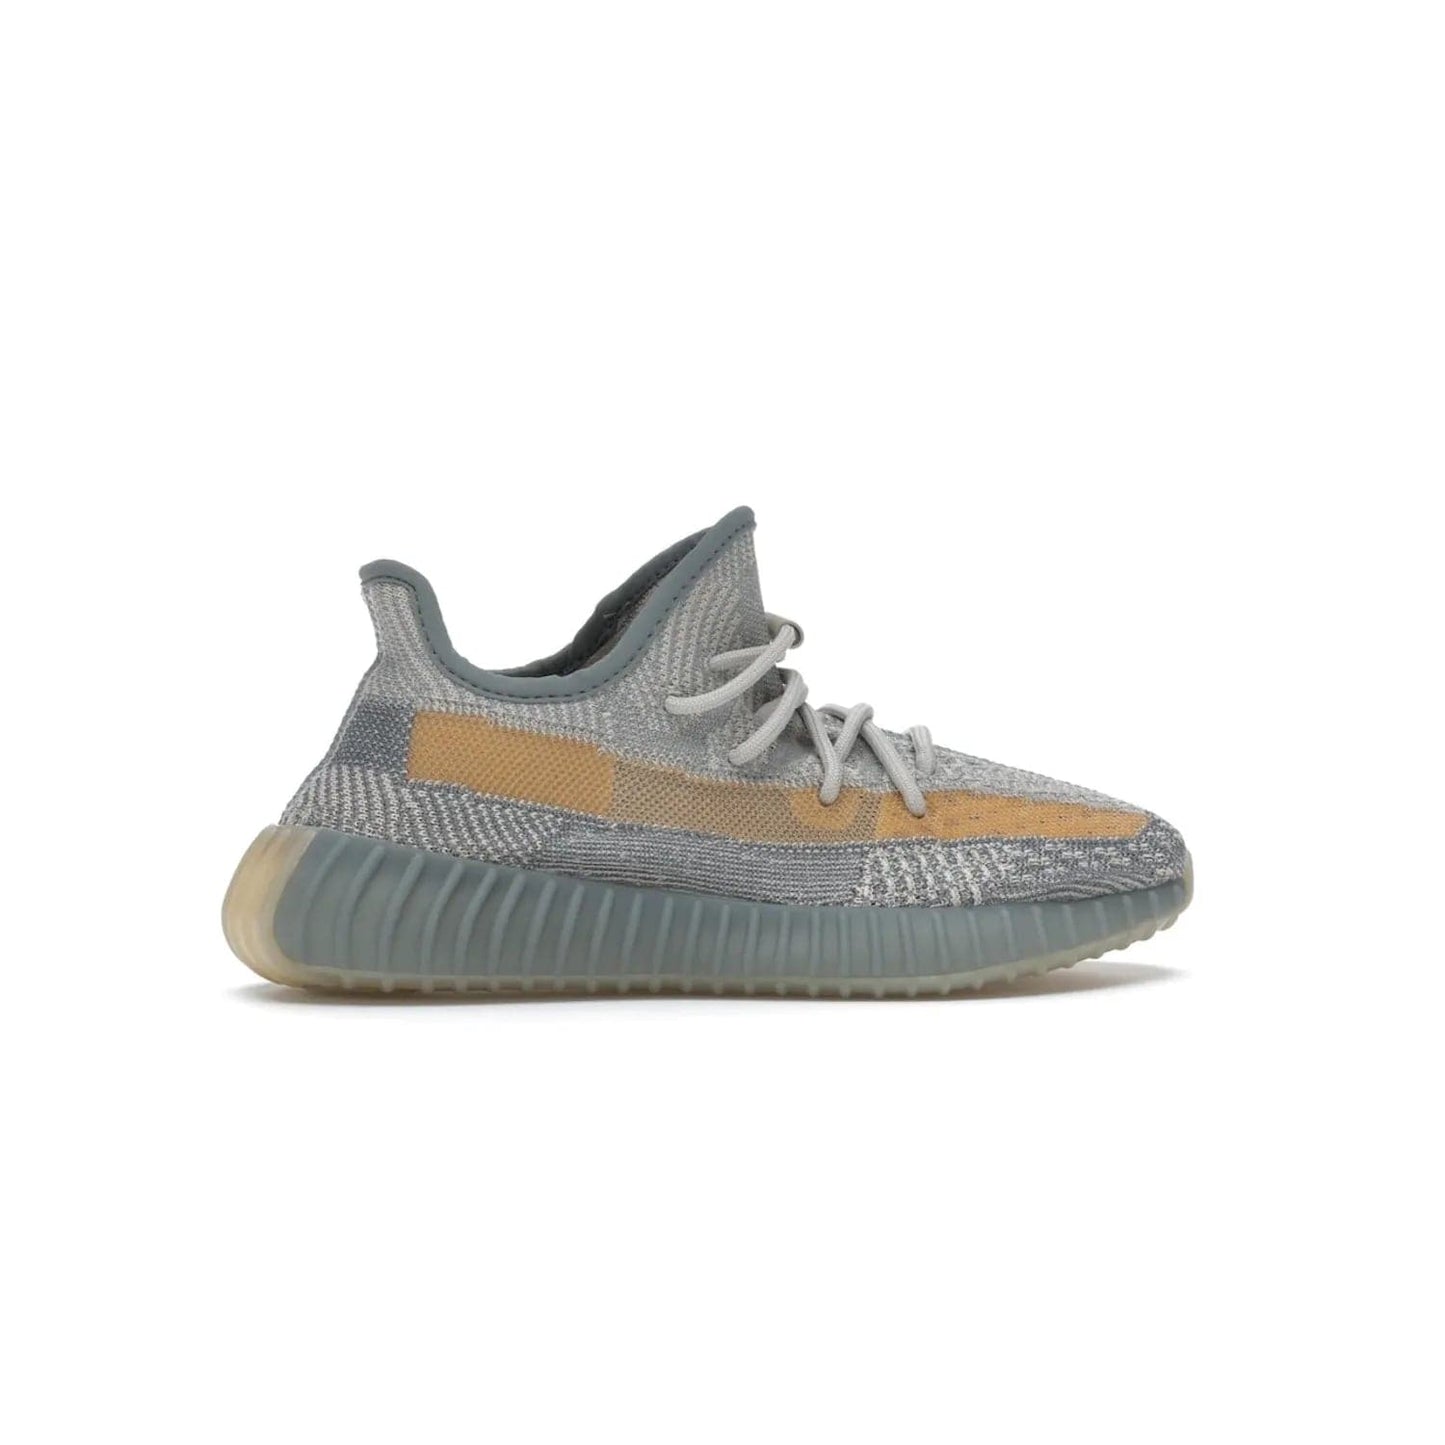 adidas Yeezy Boost 350 V2 Israfil - Image 36 - Only at www.BallersClubKickz.com - The adidas Yeezy Boost 350 V2 Israfil provides a unique style with a triple colorway and multi-colored threads. Featuring BOOST cushioning in a translucent midsole, this must-have sneaker drops in August 2020.